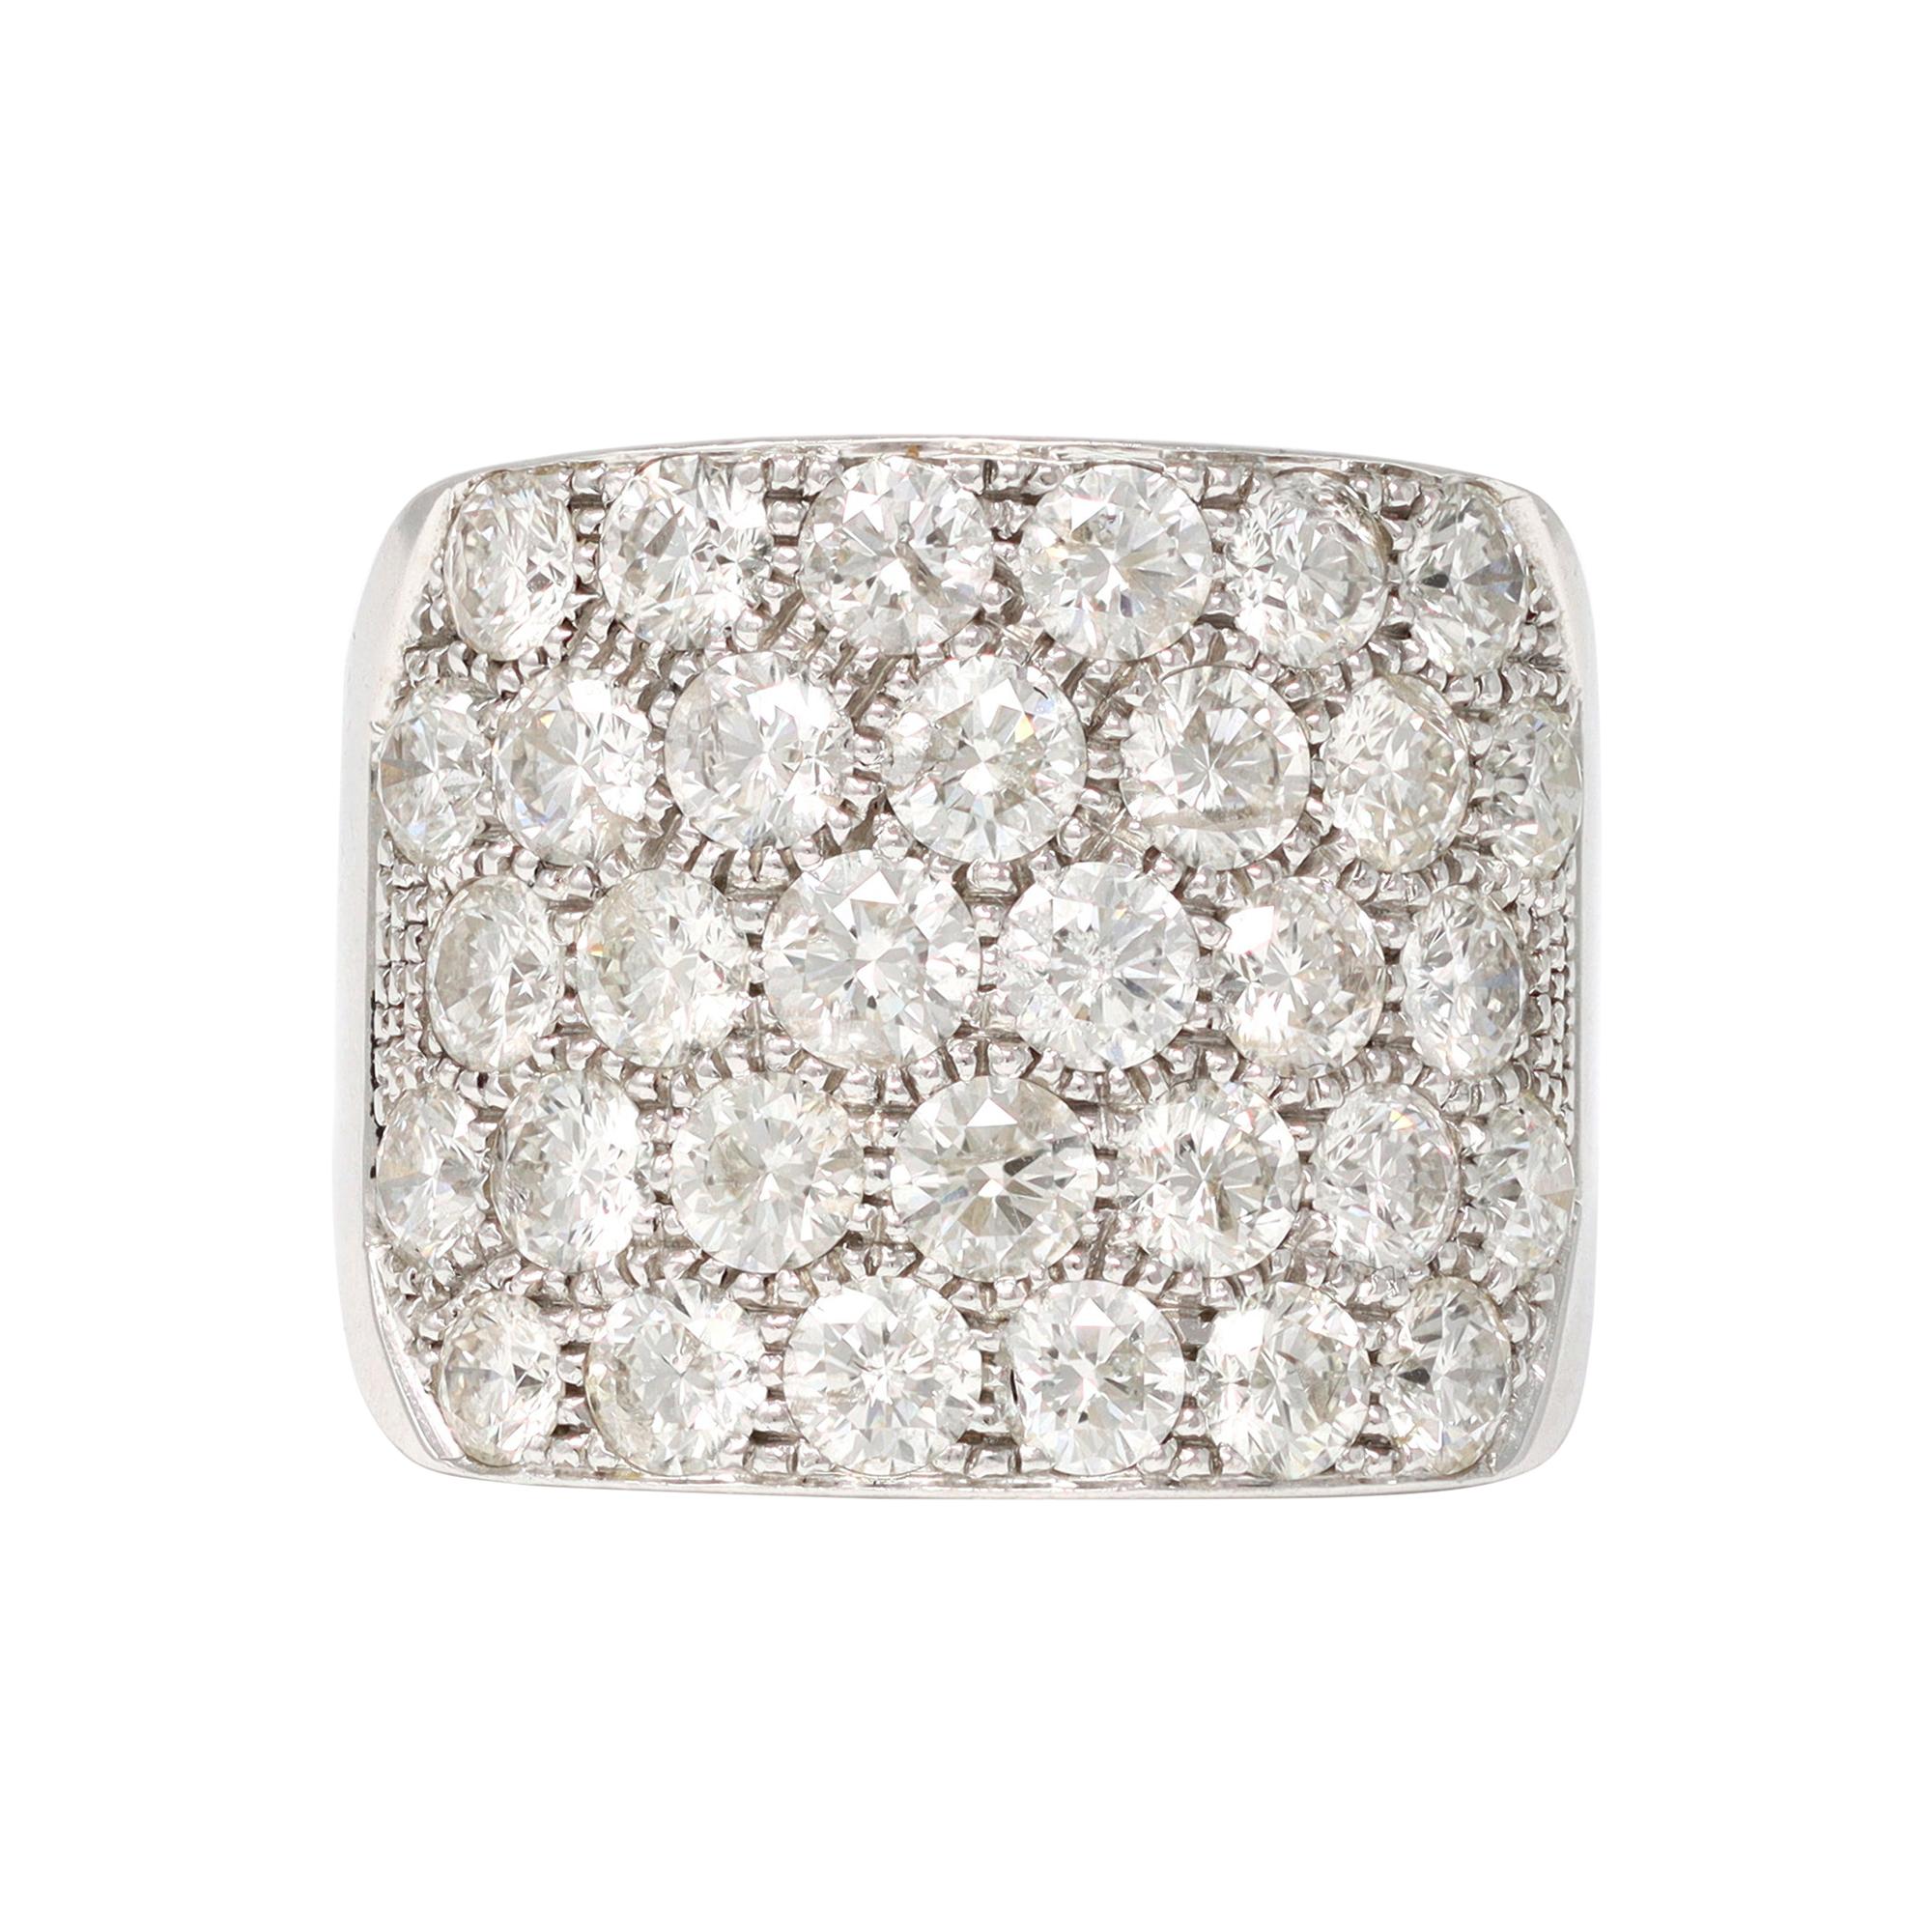 Large Pavé Diamond Cocktail Band Ring in 14k